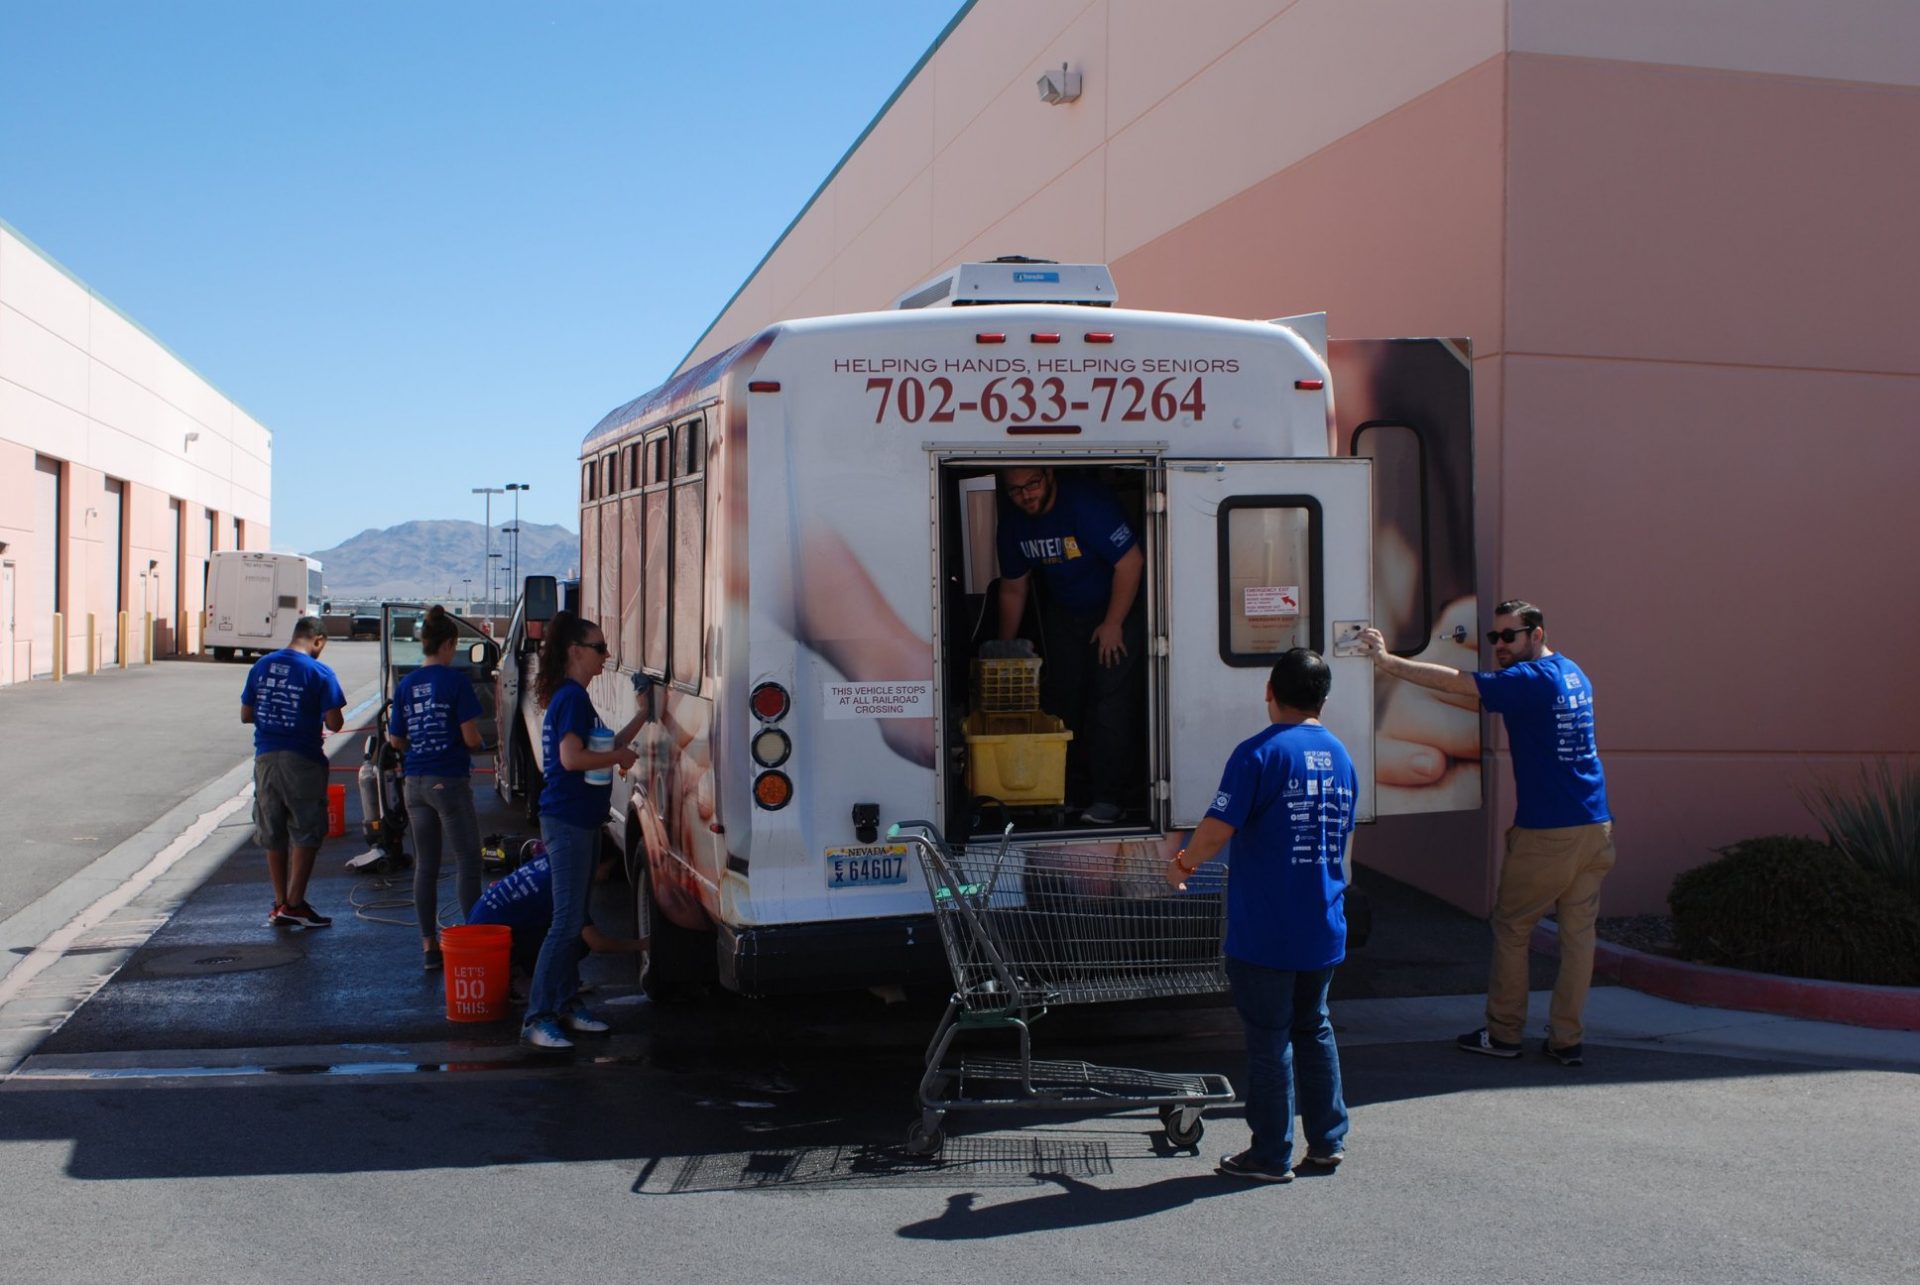 A group of Helping Hands of Las Vegas Valley volunteers work to set-up food deliveries into a 14-passenger bus.